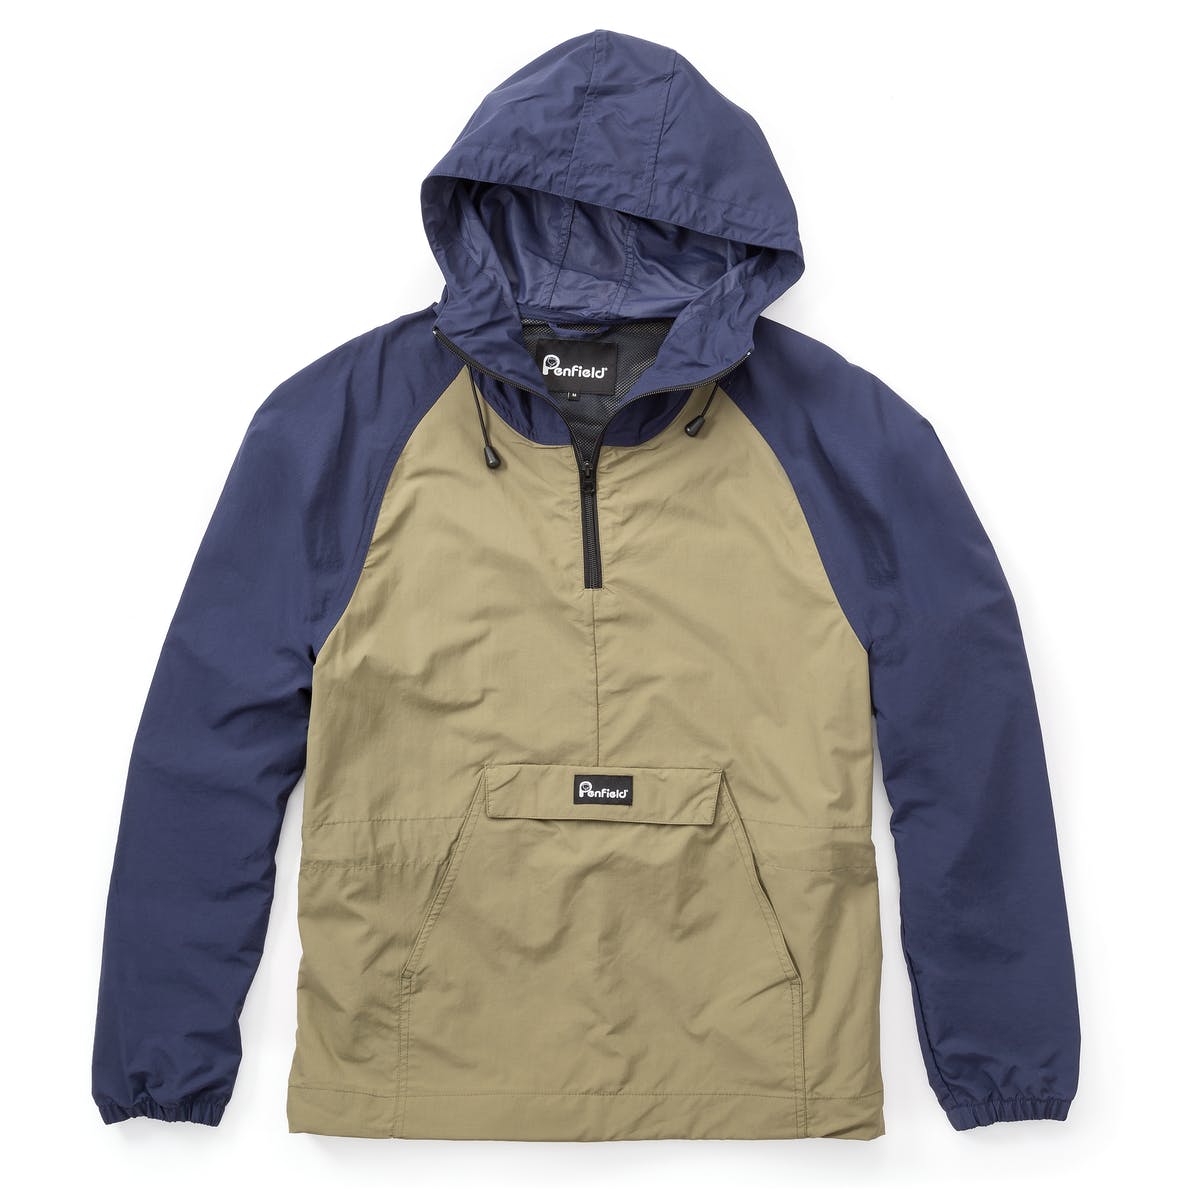 Penfield PACJAC Anorak — What is a Gentleman